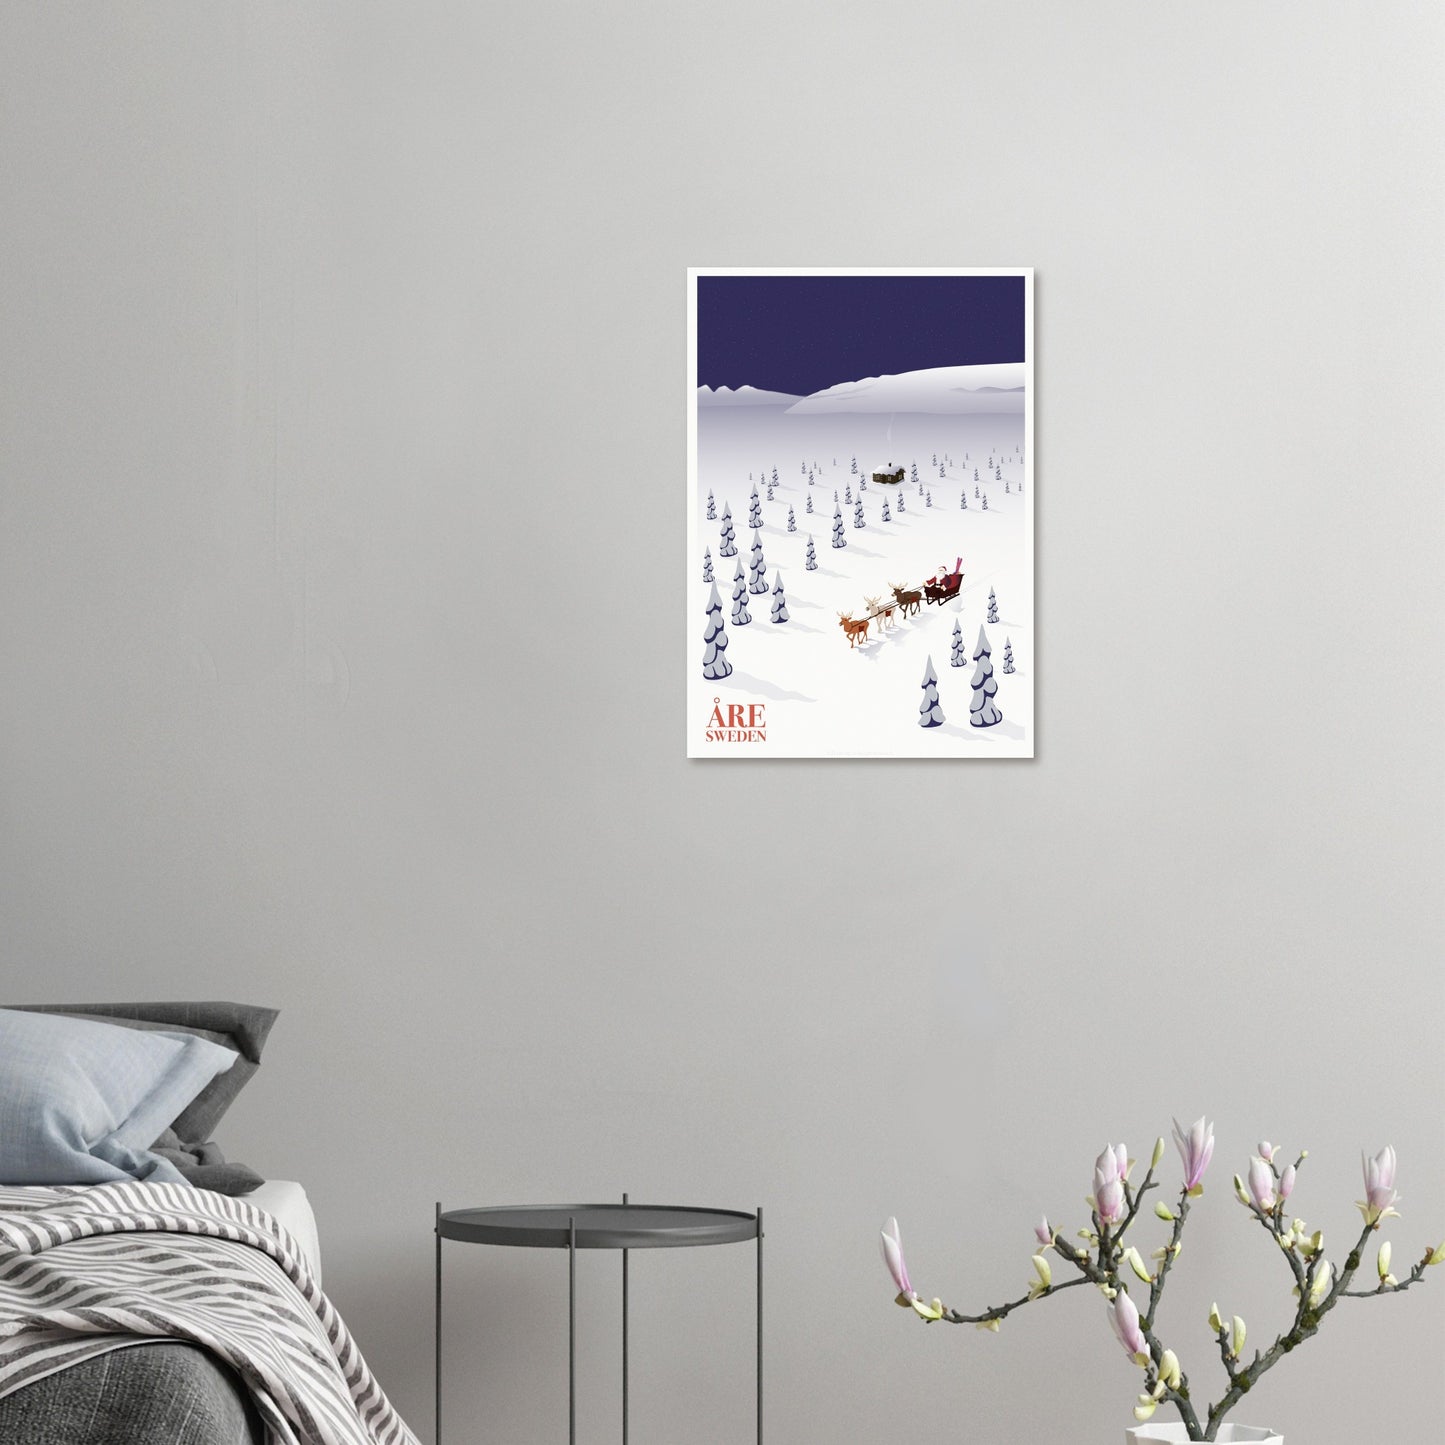 Santa is Coming to Åre, Sweden, Ullådalen, Poster by Posterify design Print on Premium Matte Paper - Posterify